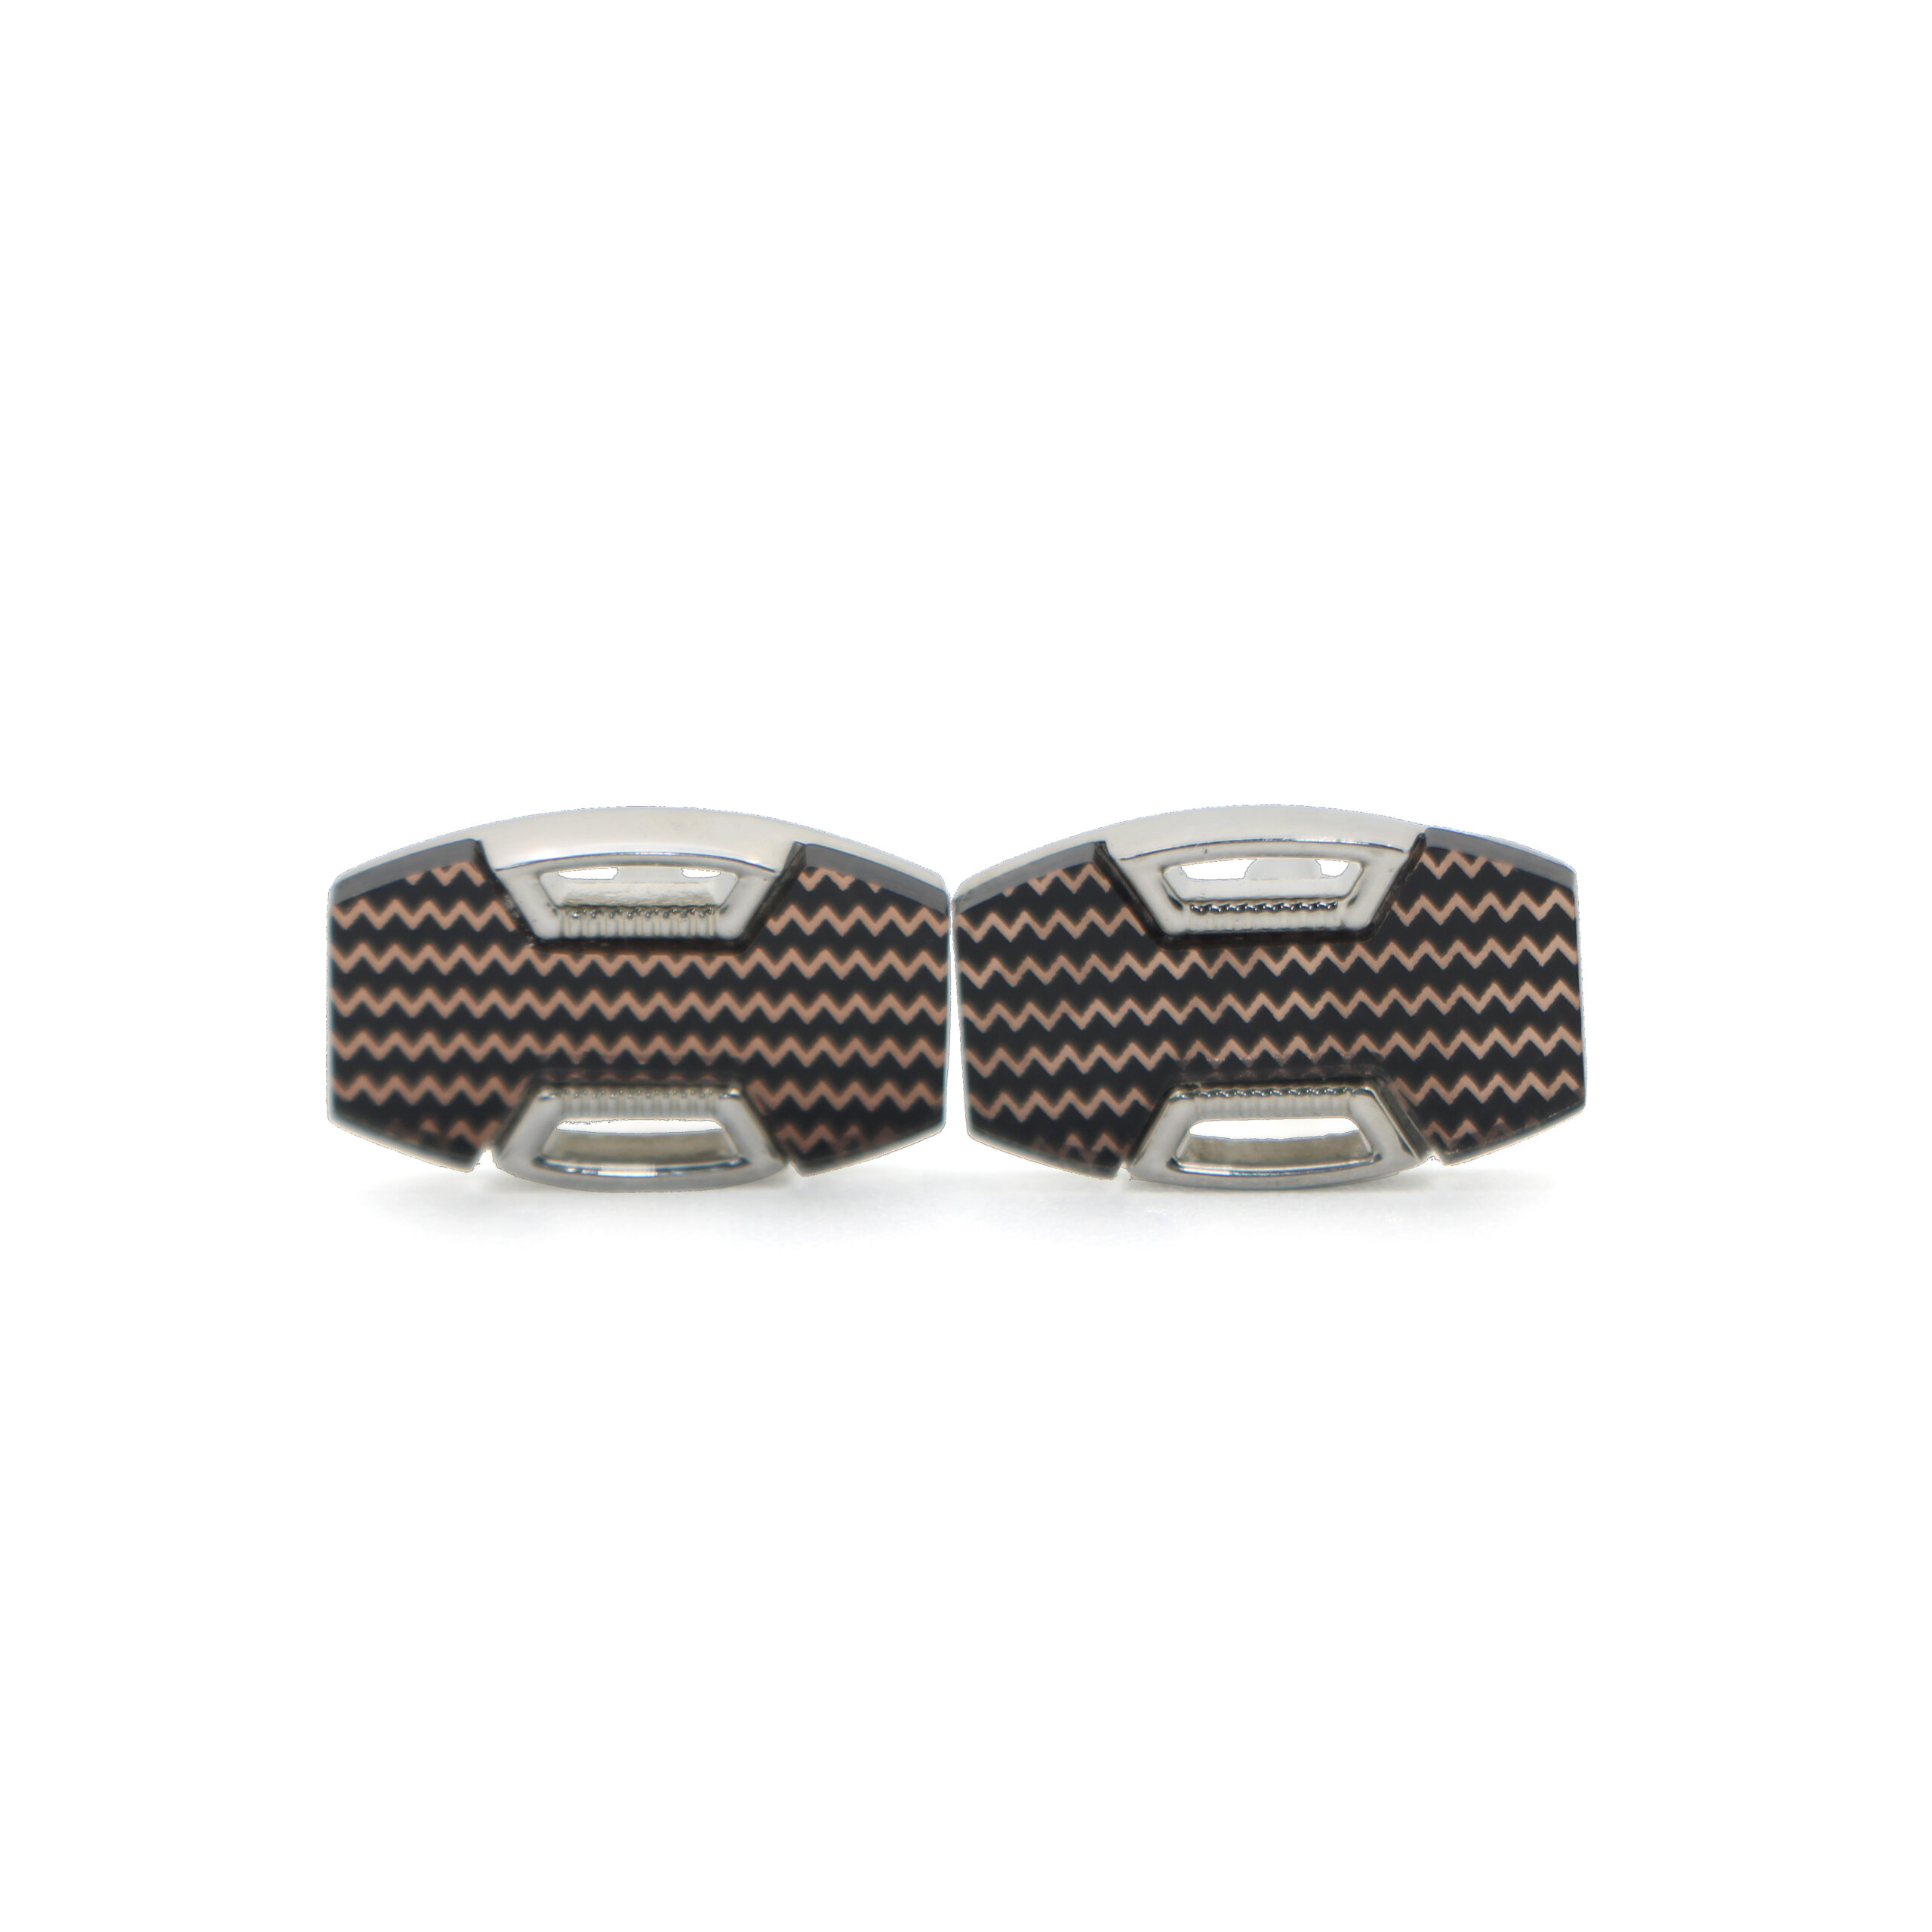 Cufflers Vintage Cufflinks for Men’s Shirt with a Gift Box – CU-1009